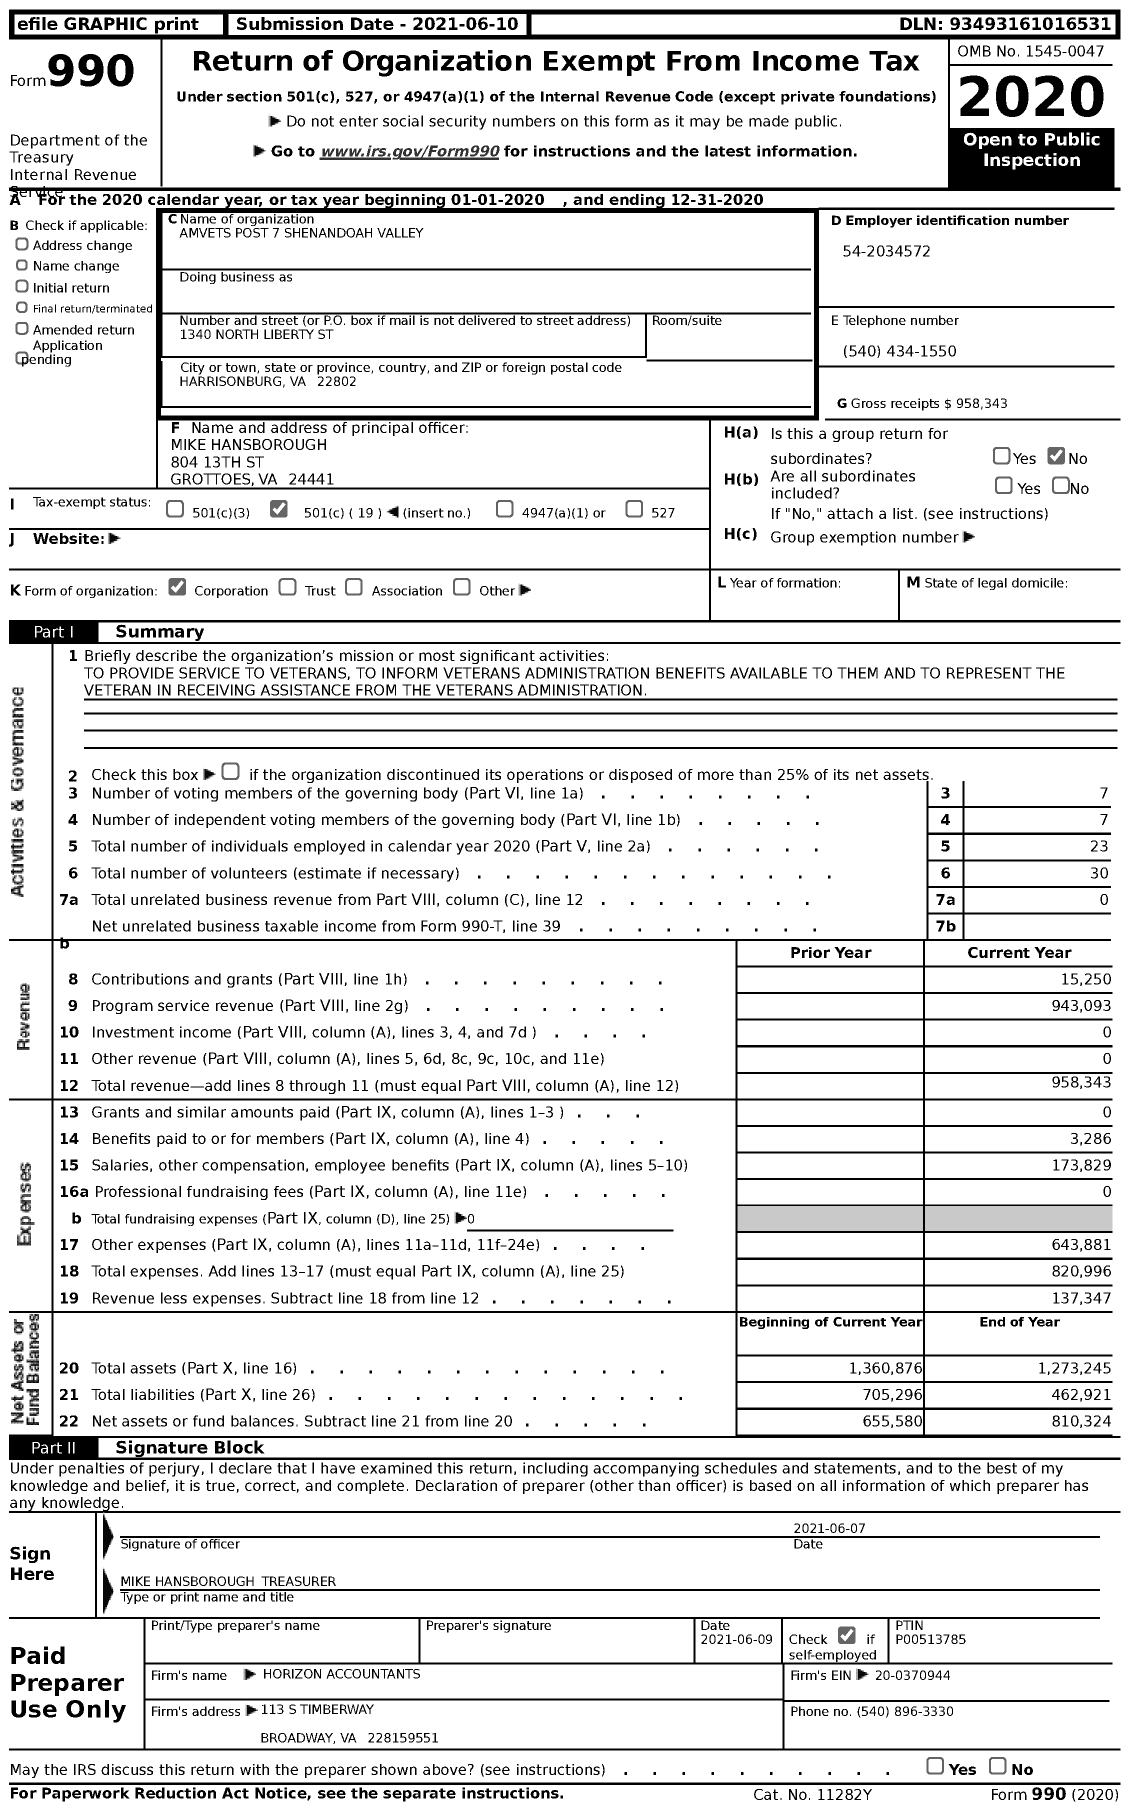 Image of first page of 2020 Form 990 for Amvets Post 7 Shenandoah Valley